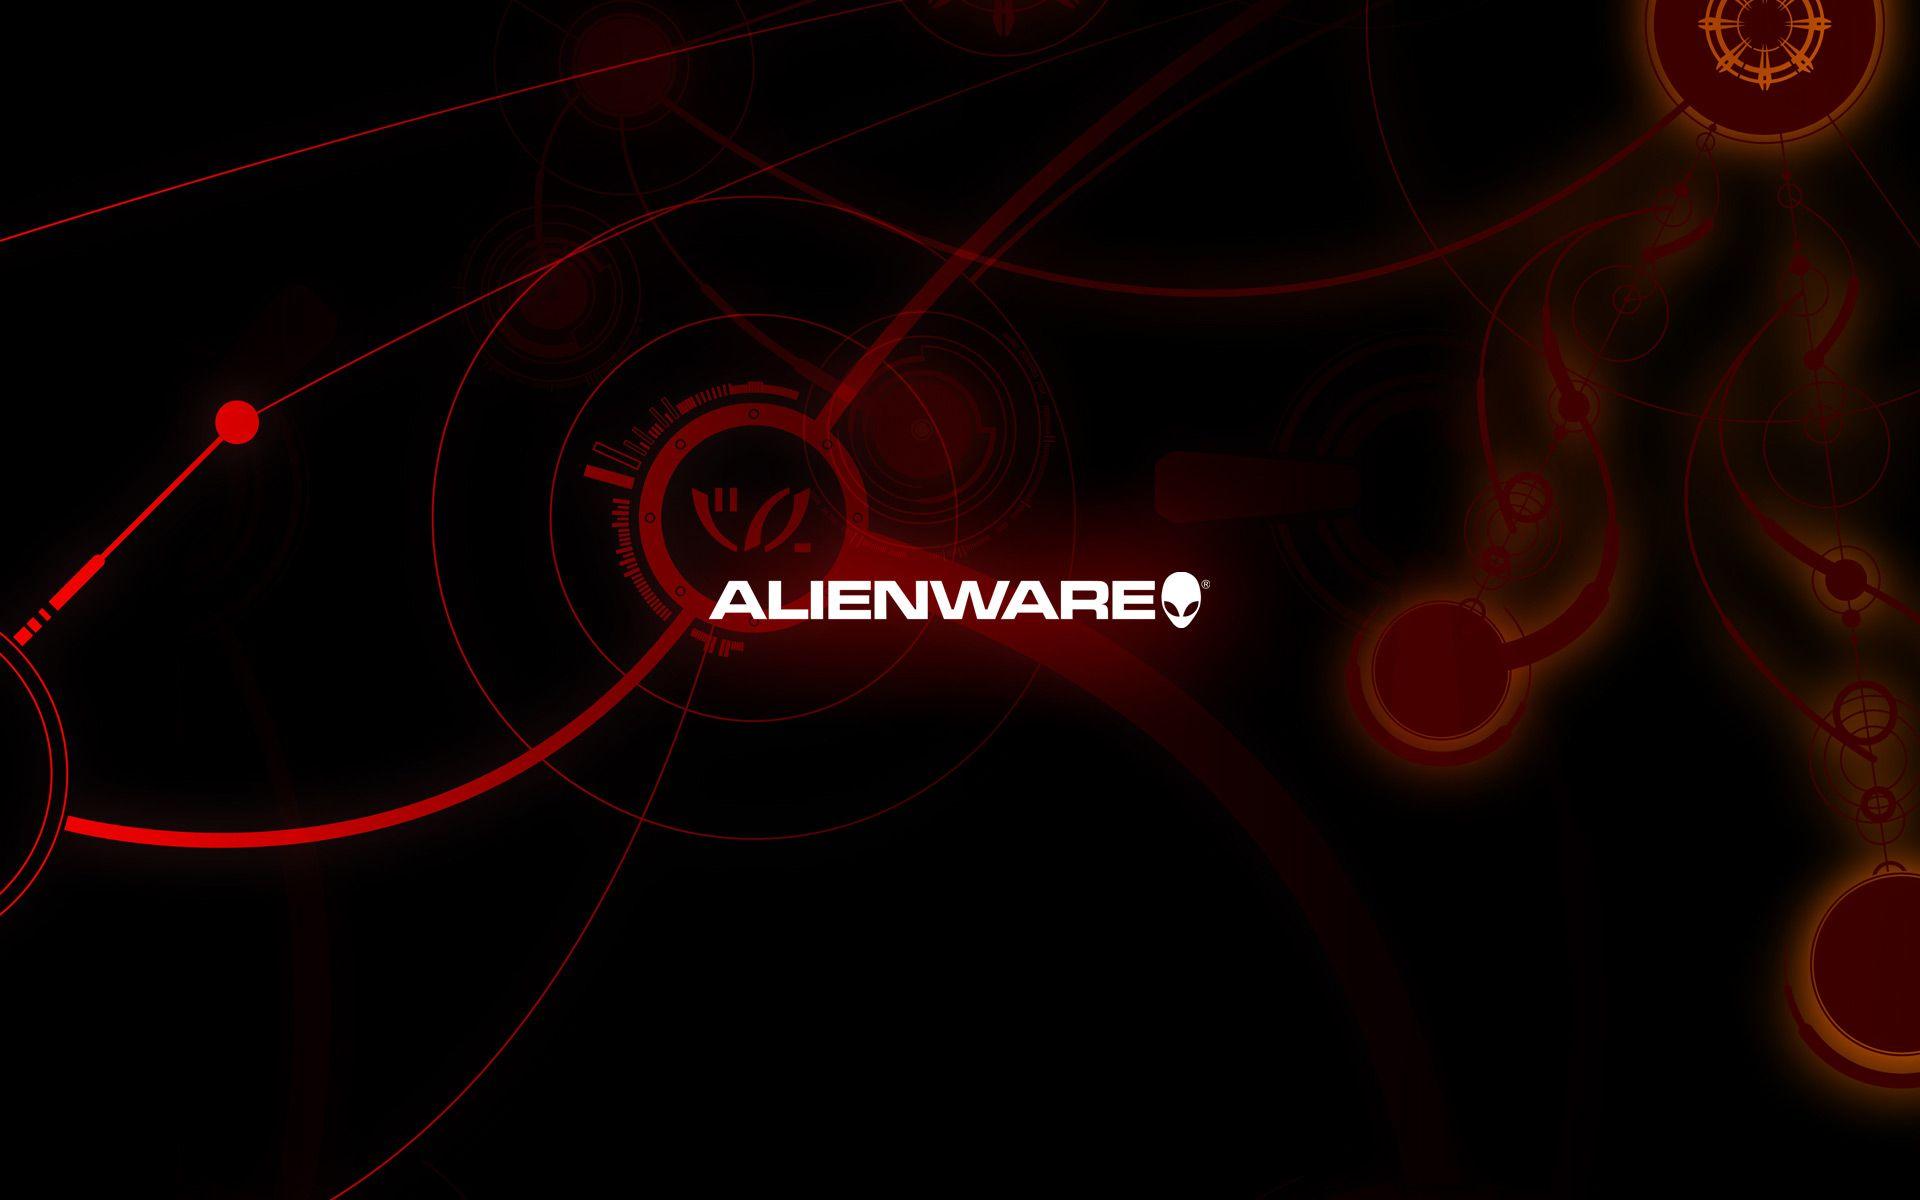 HOW TO: Restore the Alienware 'Look and Feel' after a clean install of Windows